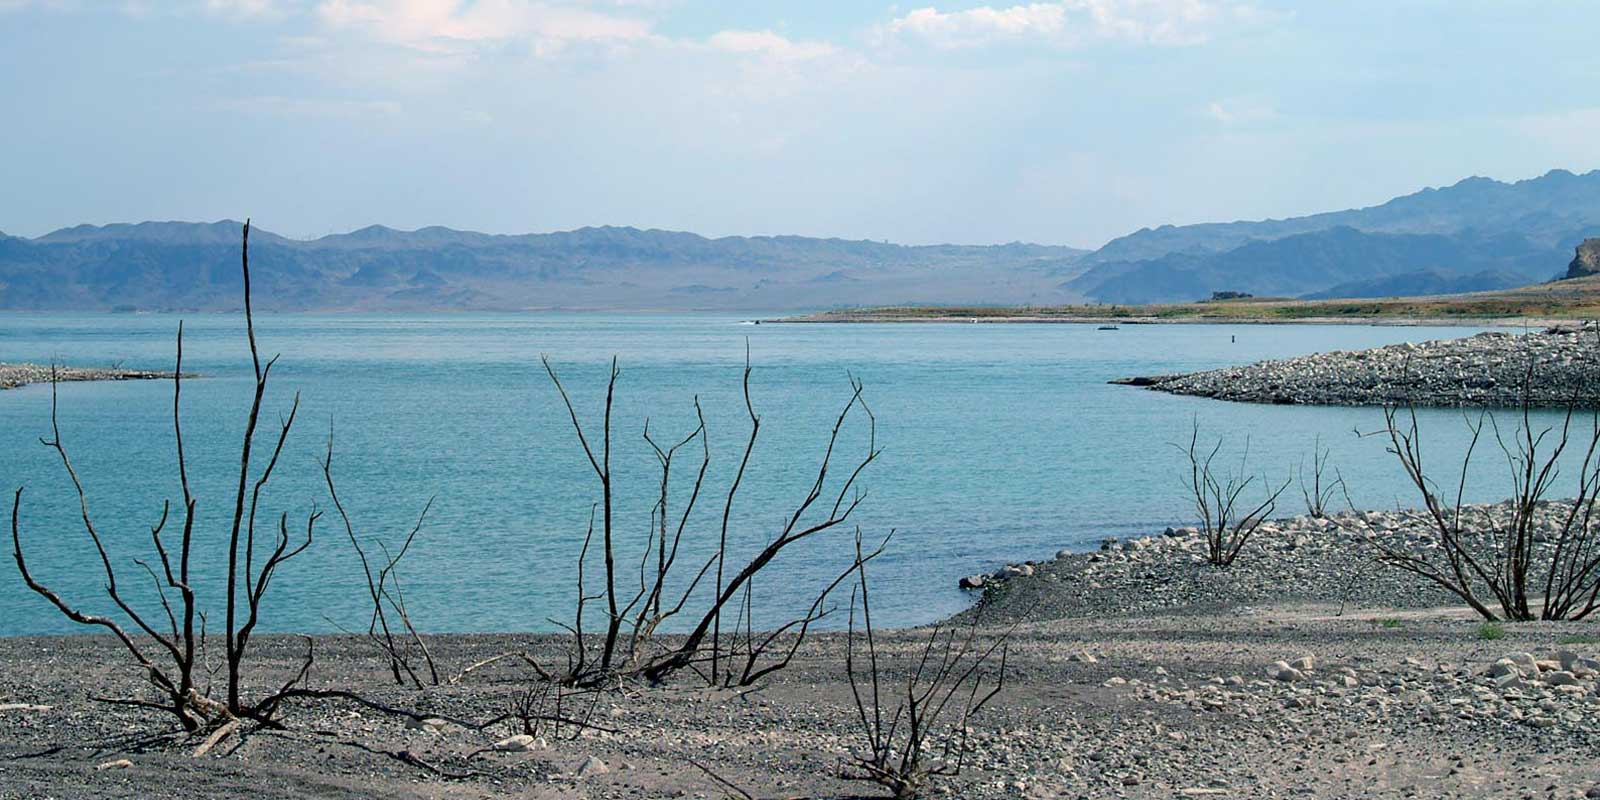 Landscape photo of the barren shoreline at Lake Mead during a drought.